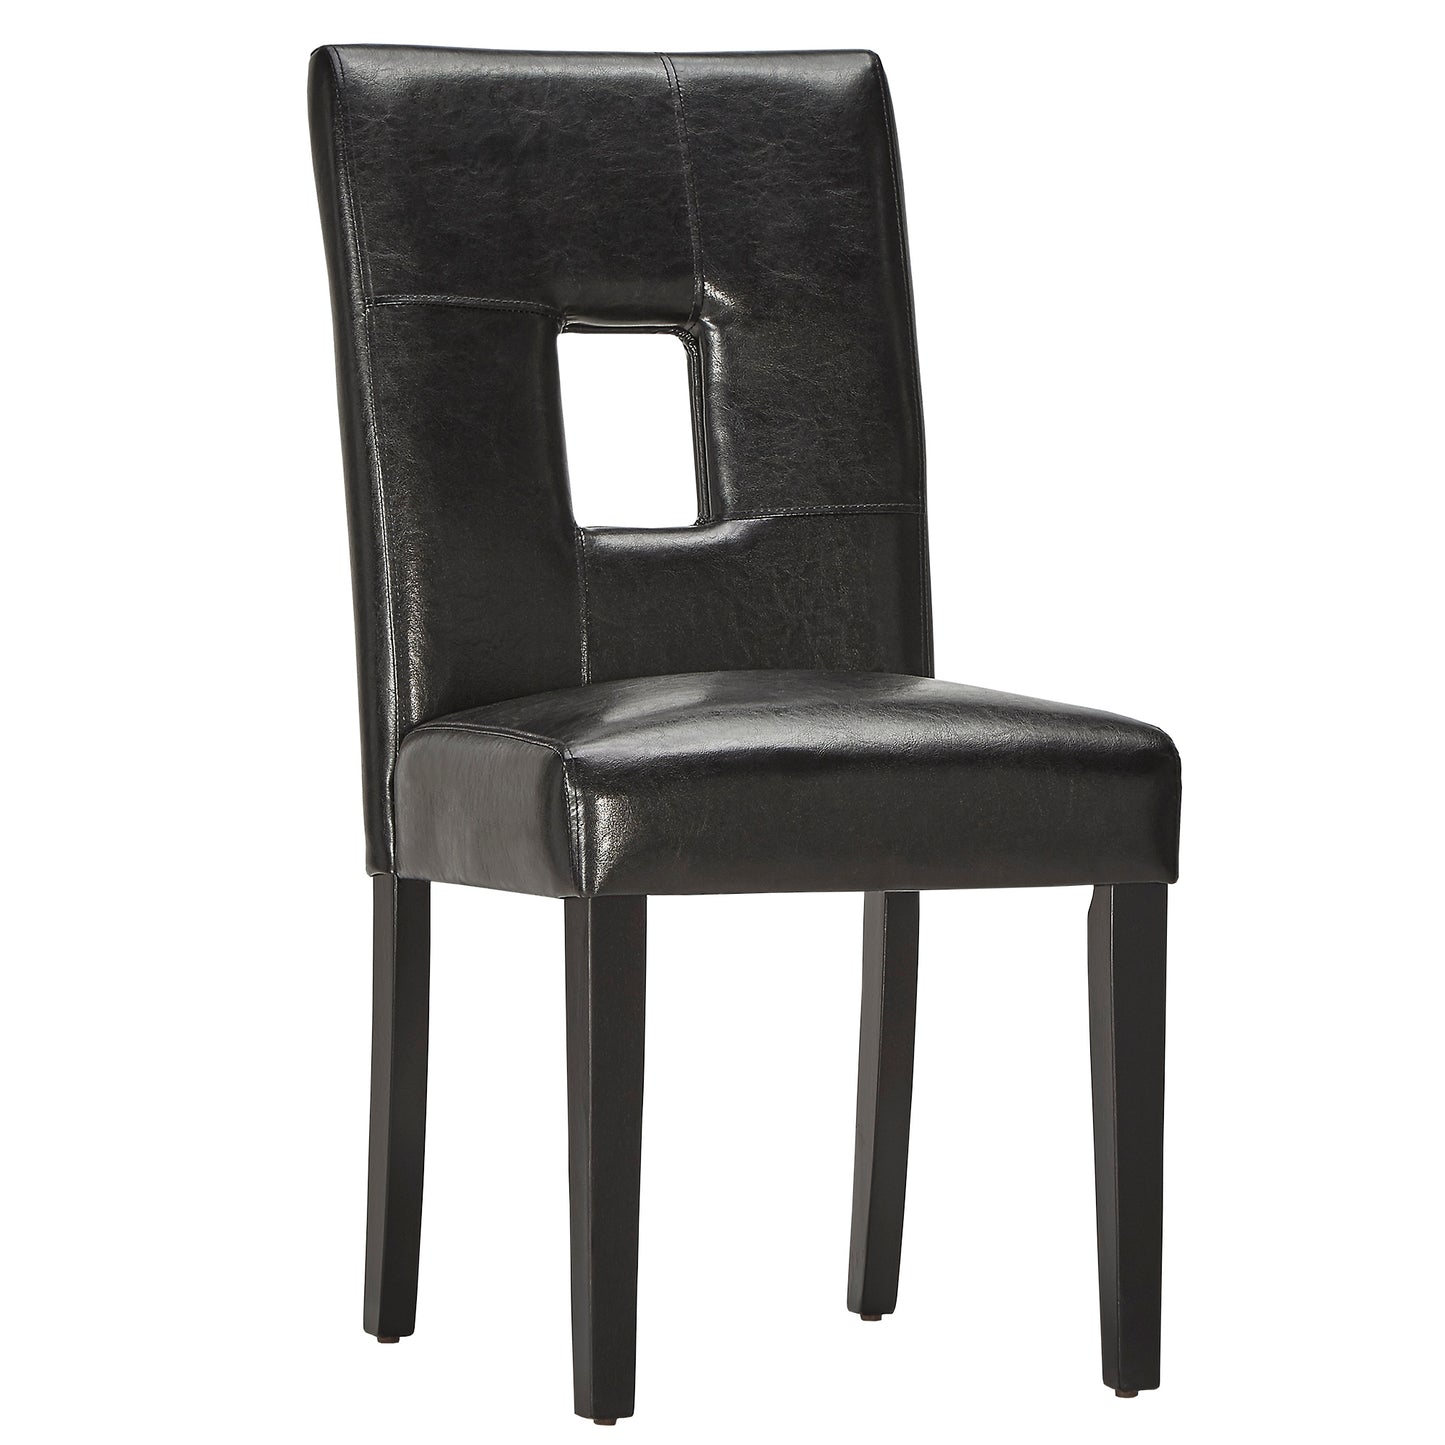 Keyhole Back Dining Chairs (Set of 2) - Black Faux Leather